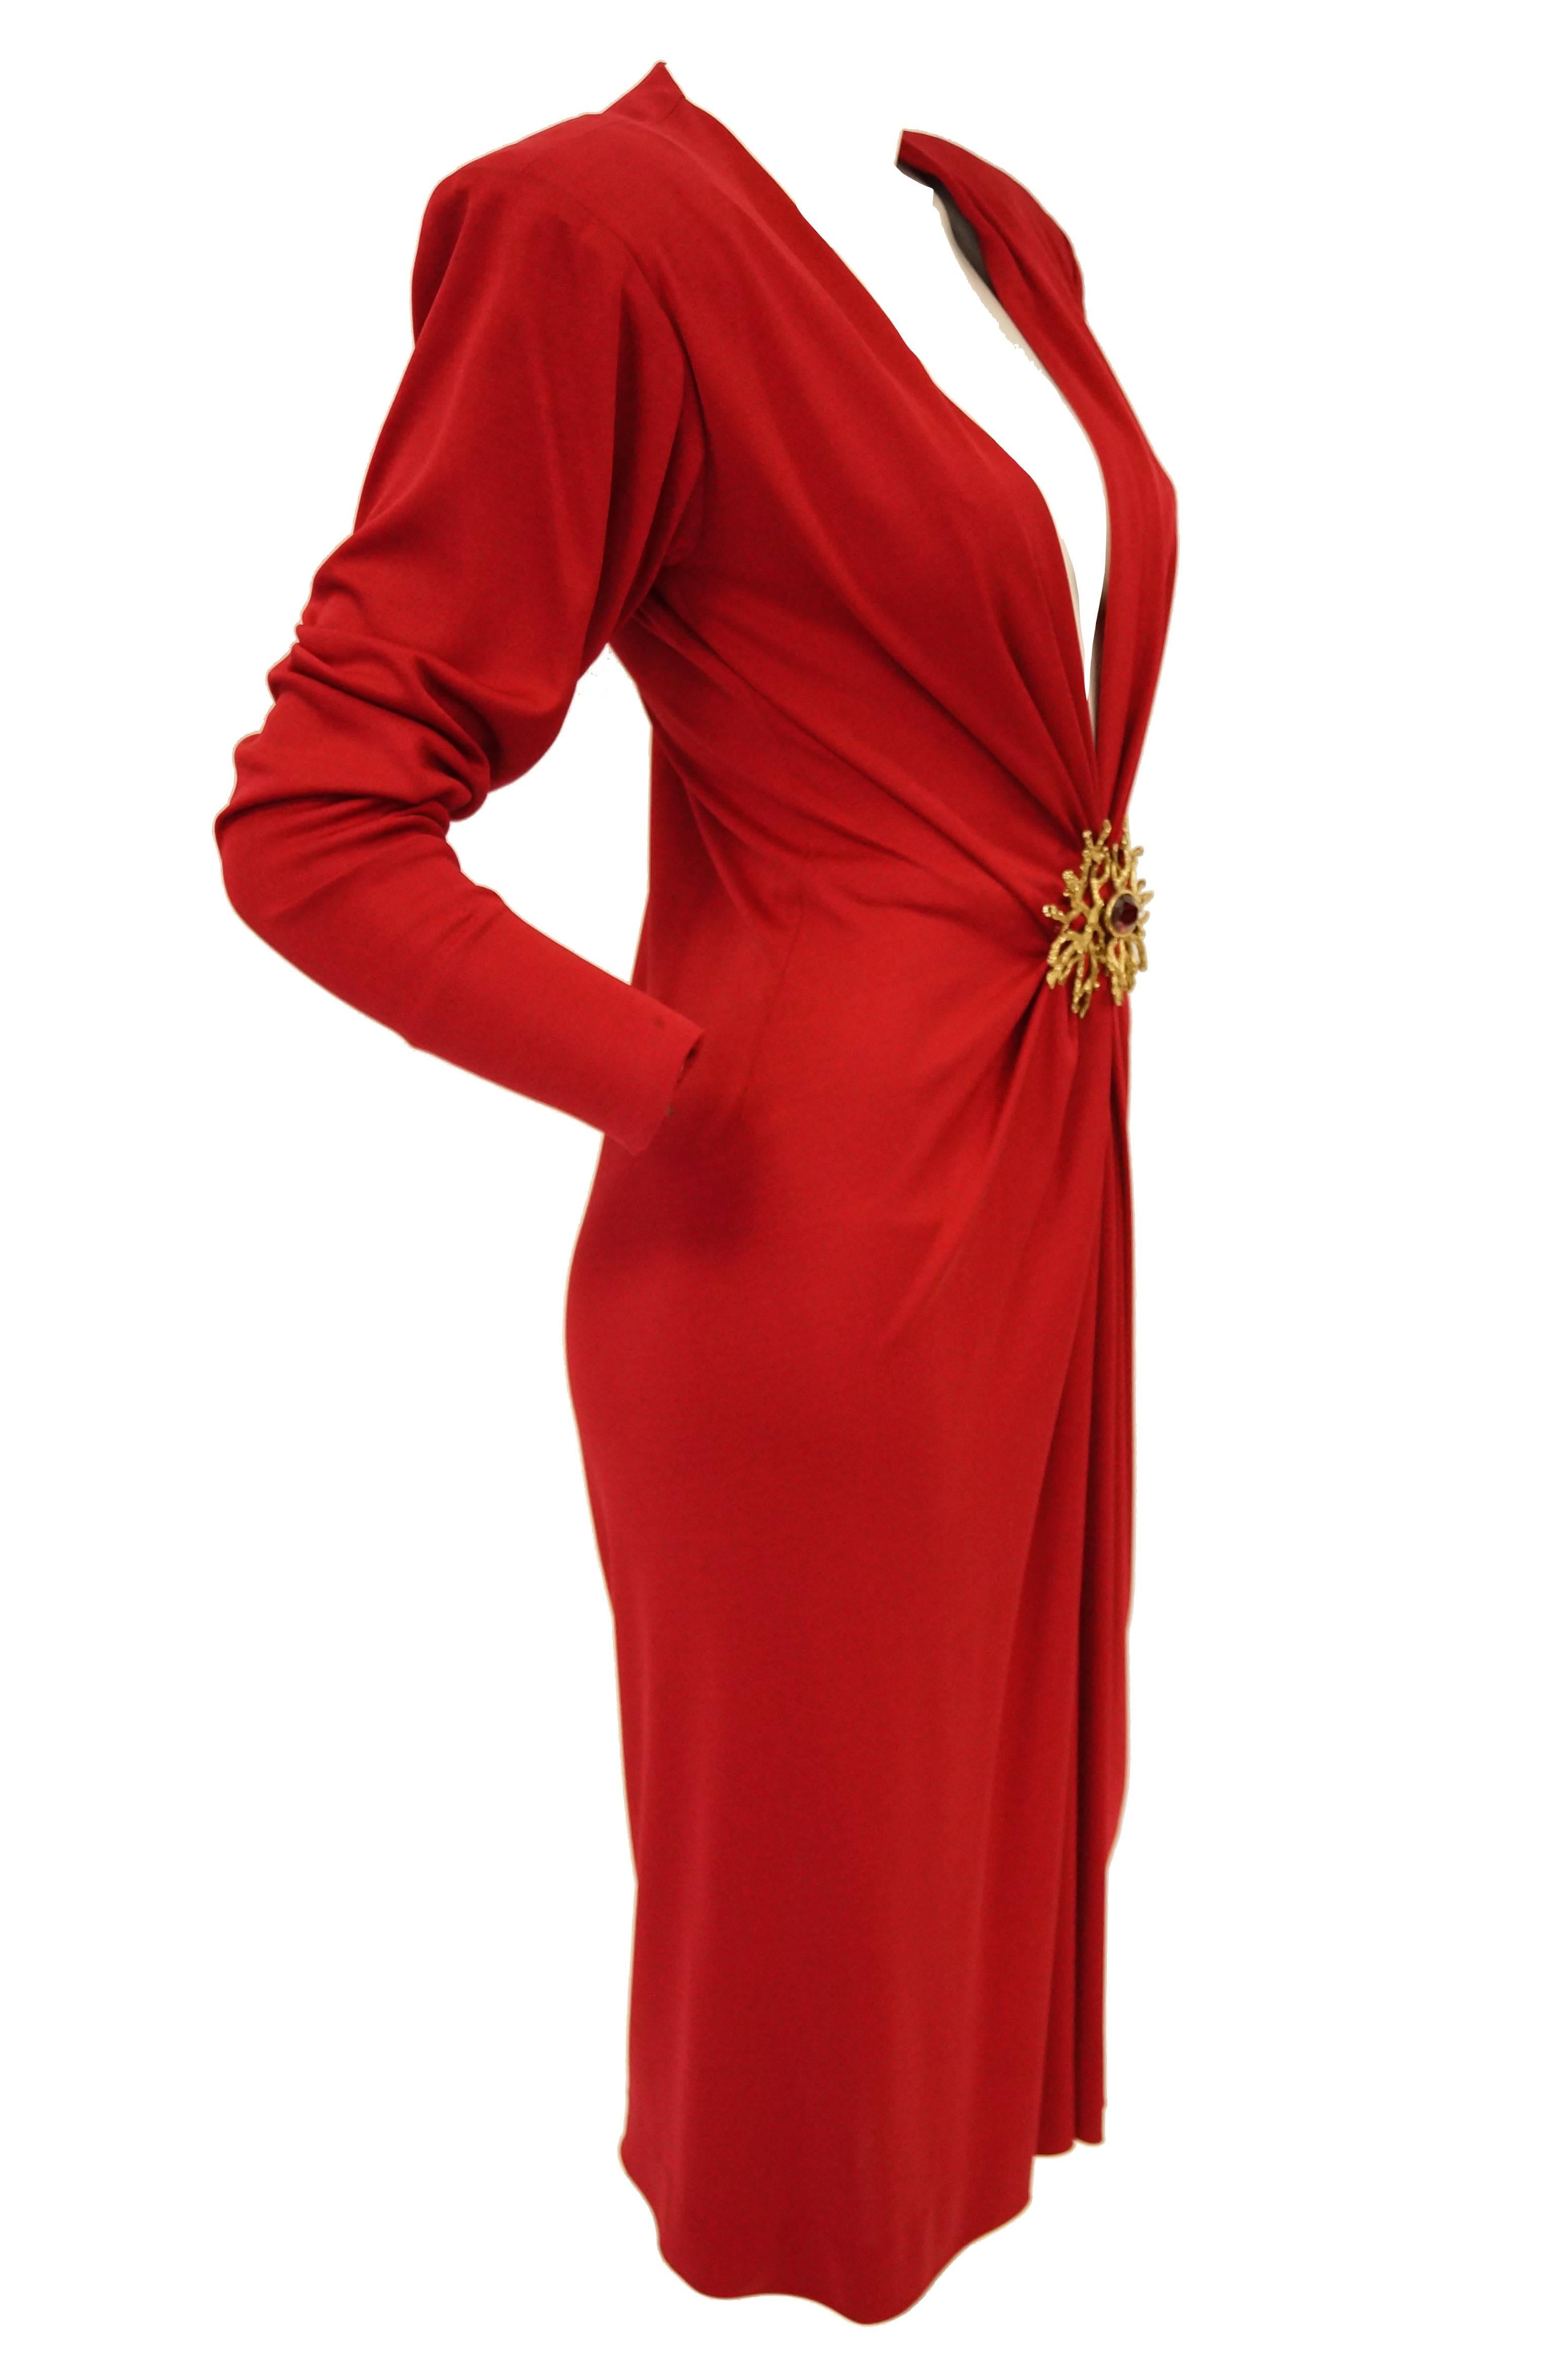 Yves Saint Laurent Silk Jersey Red Plunge Front Dress, 1980s 5